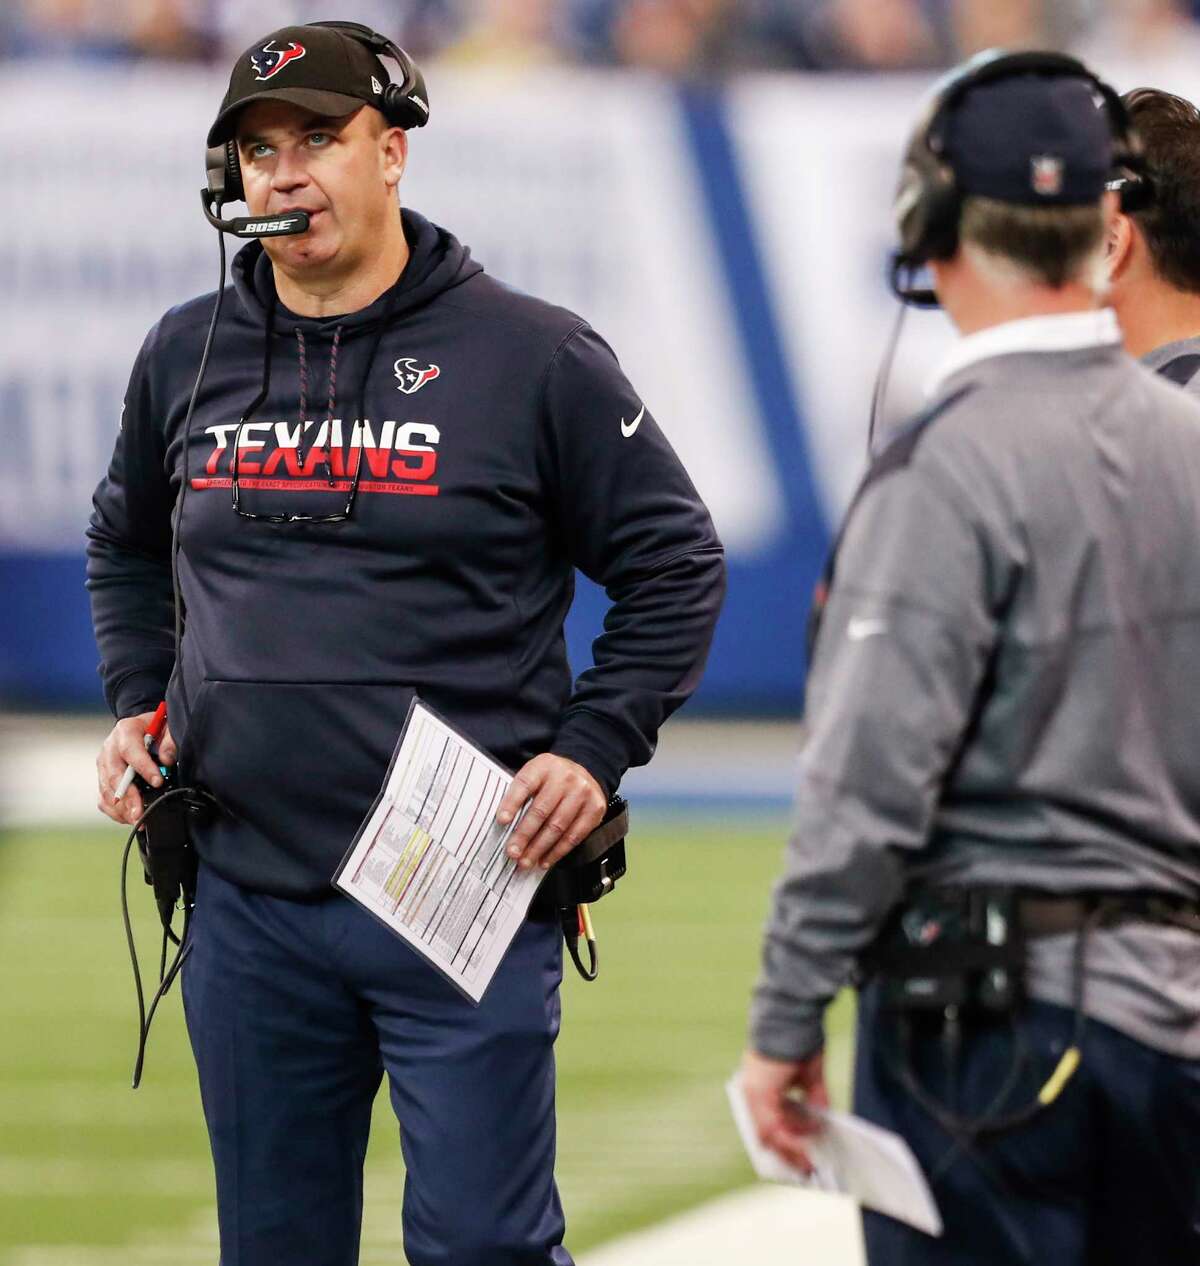 Texans coach Bill O'Brien seemed none too pleased with his team's performance late in Sunday's 22-13 loss at Indianapolis. The Texans ended the season on a six-game losing streak.